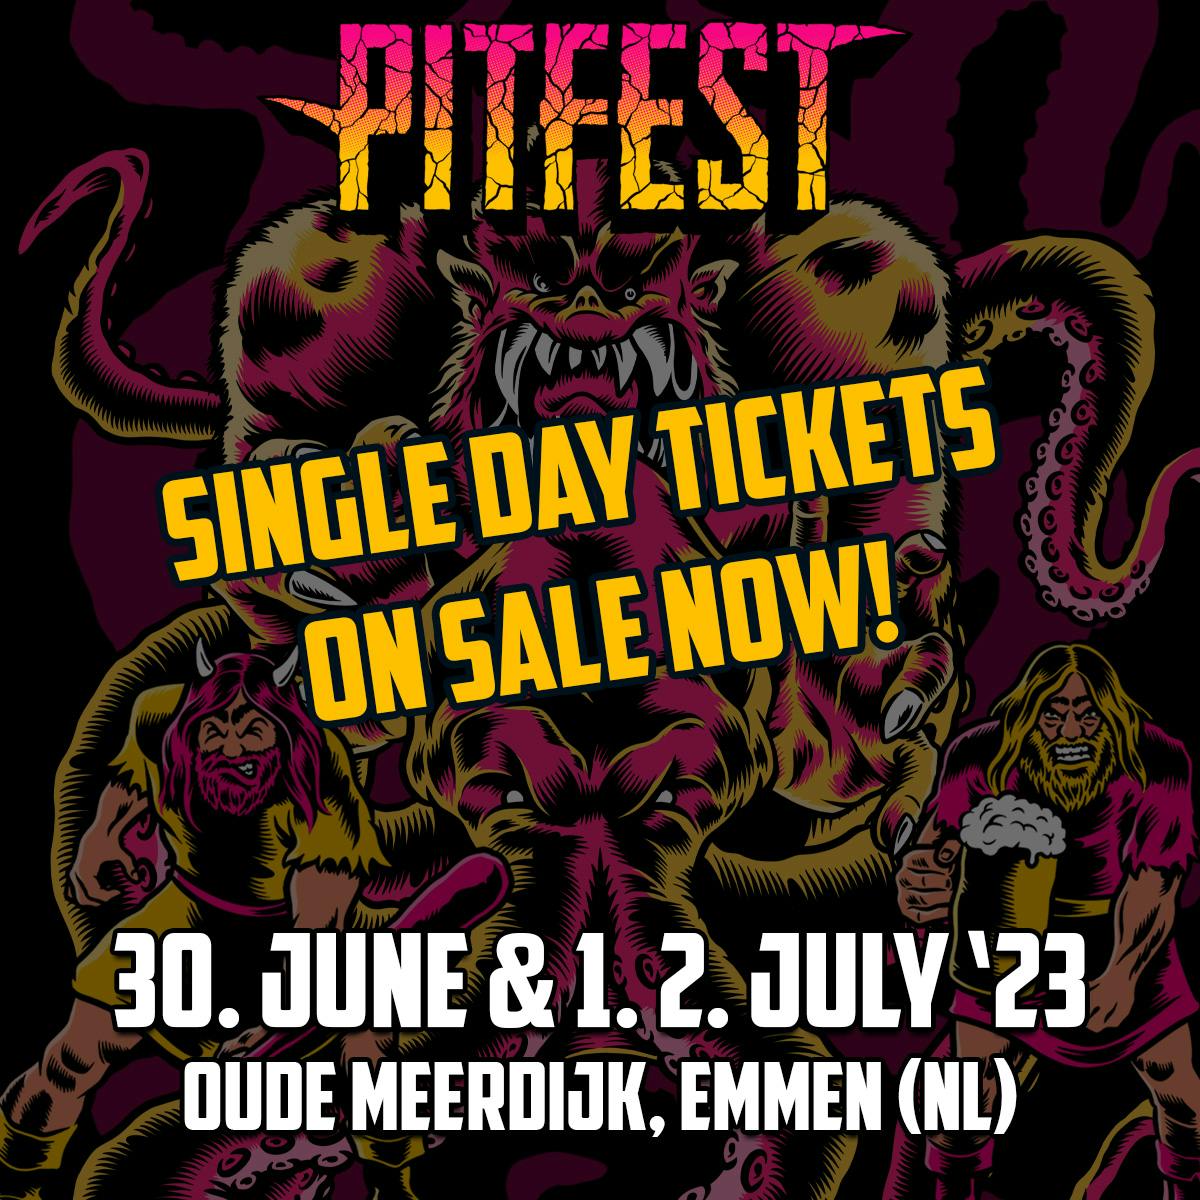 Single day tickets on sale now!